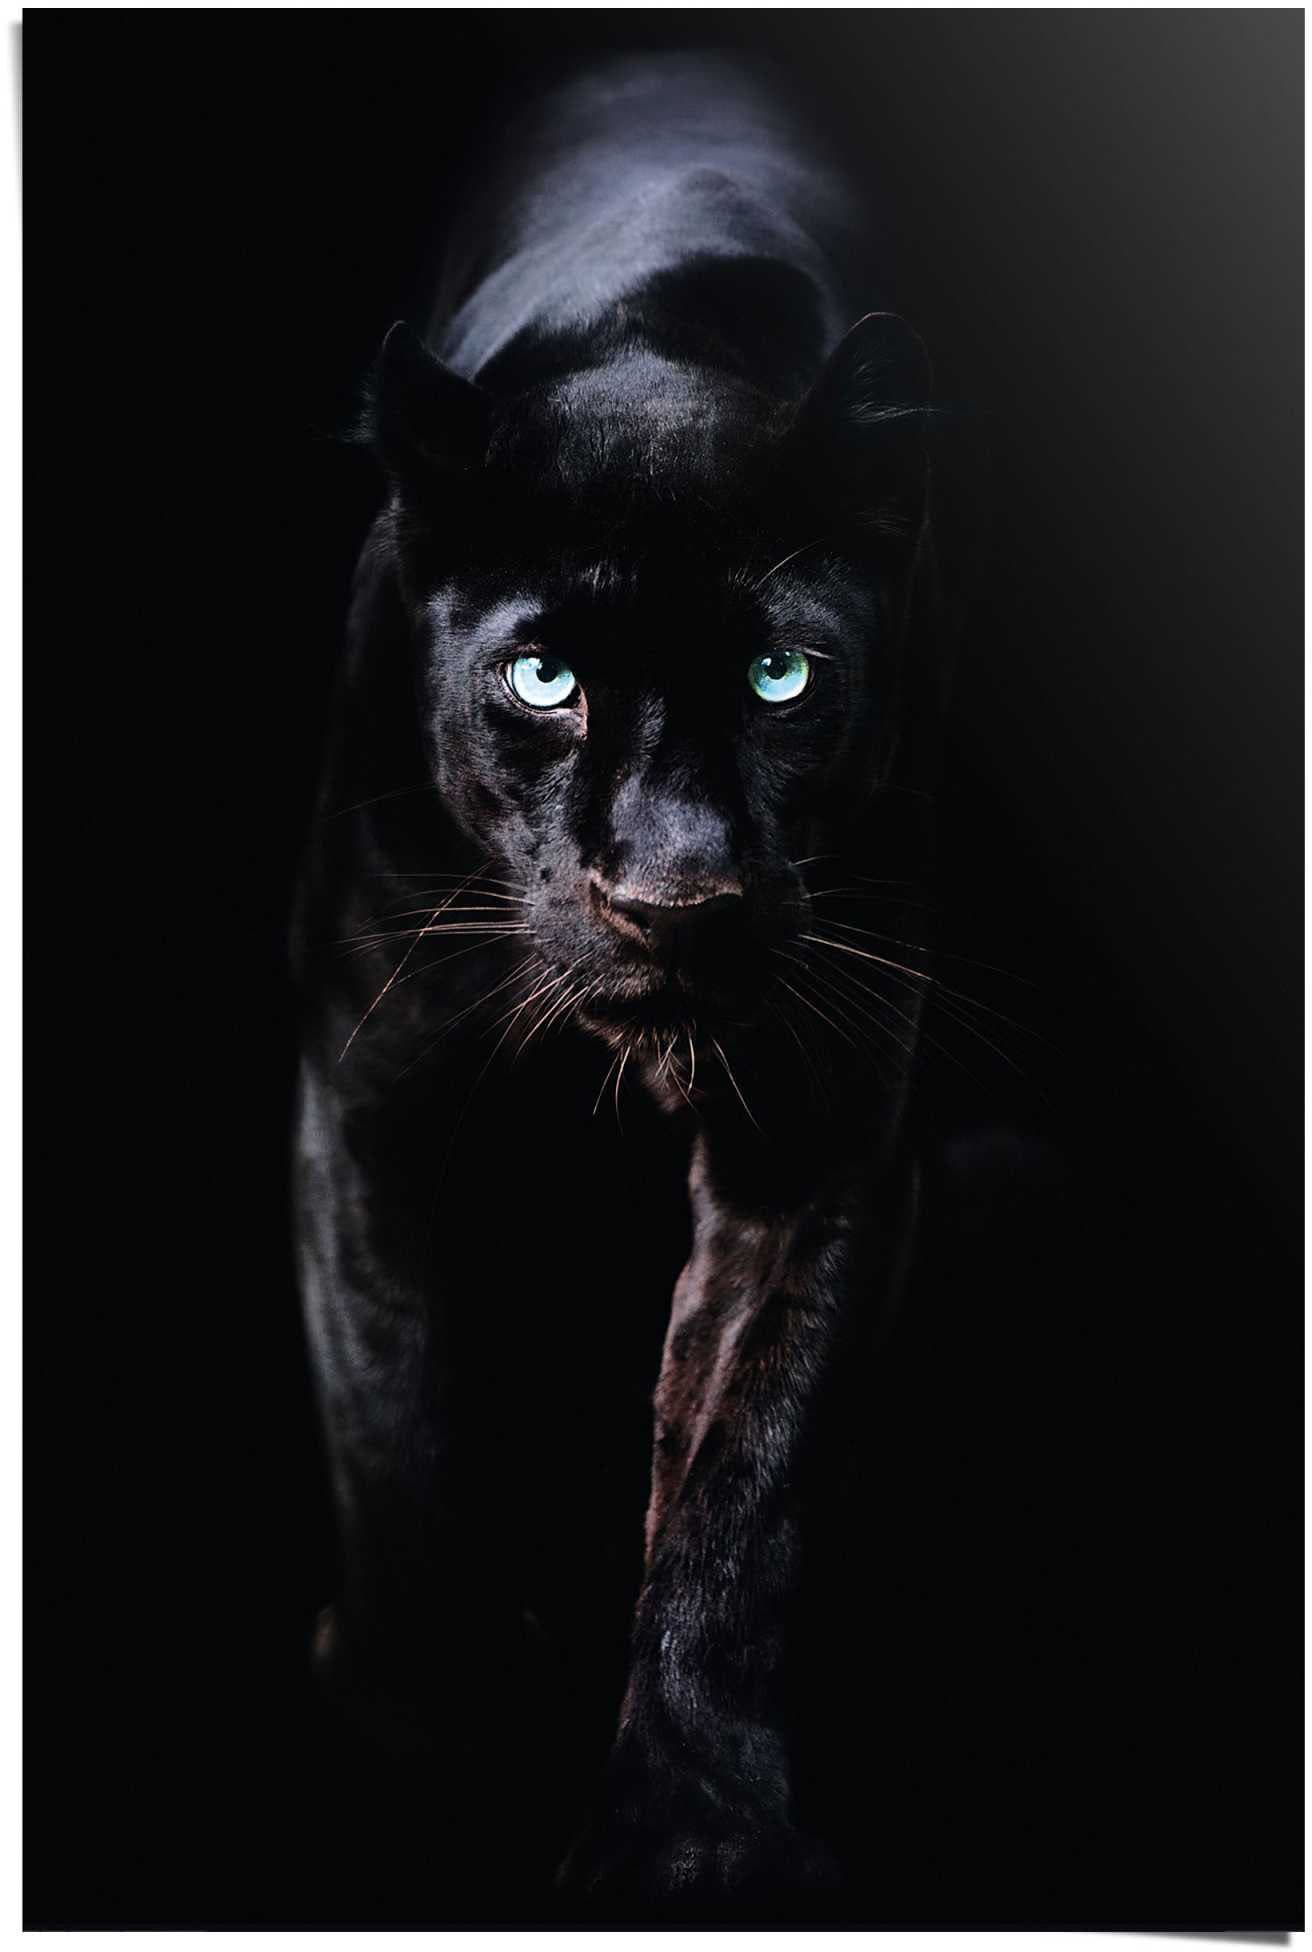 Poster »Poster Schwarzer Panther«, Tiere, (1 St.)